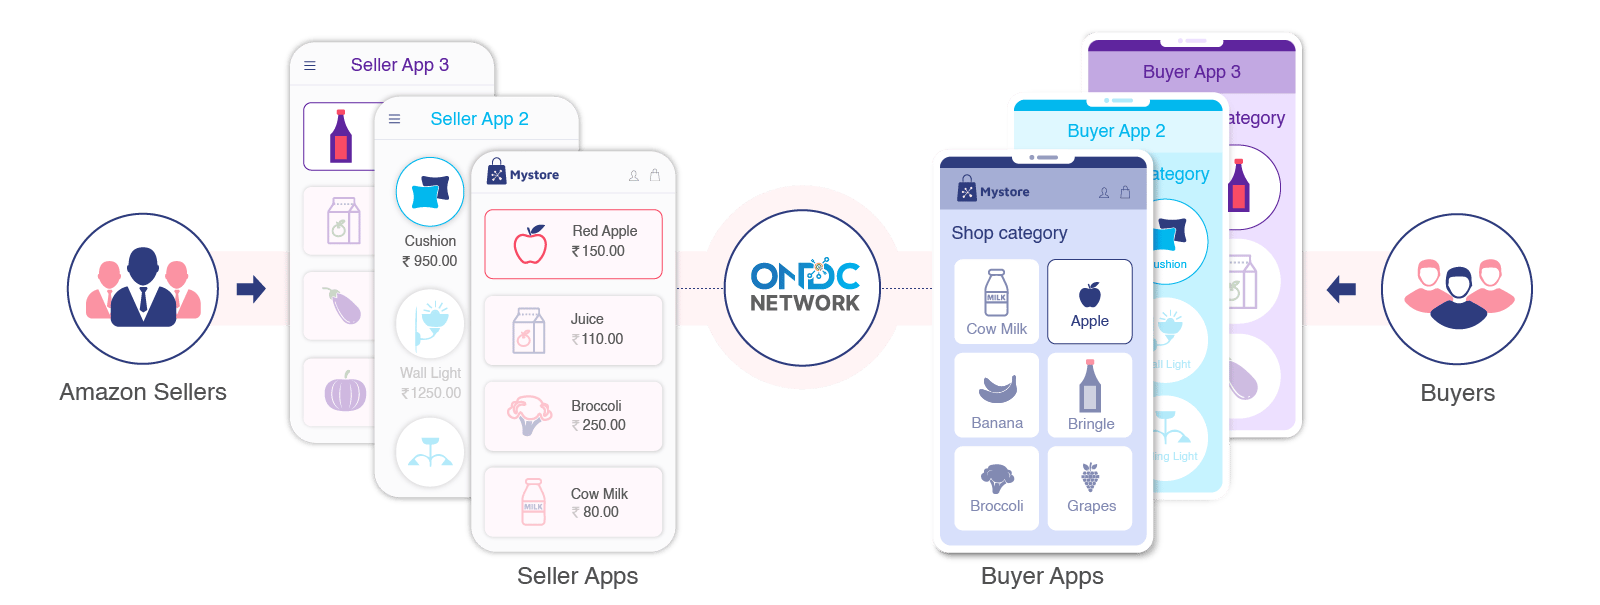 How ONDC Network works for Amazon Sellers